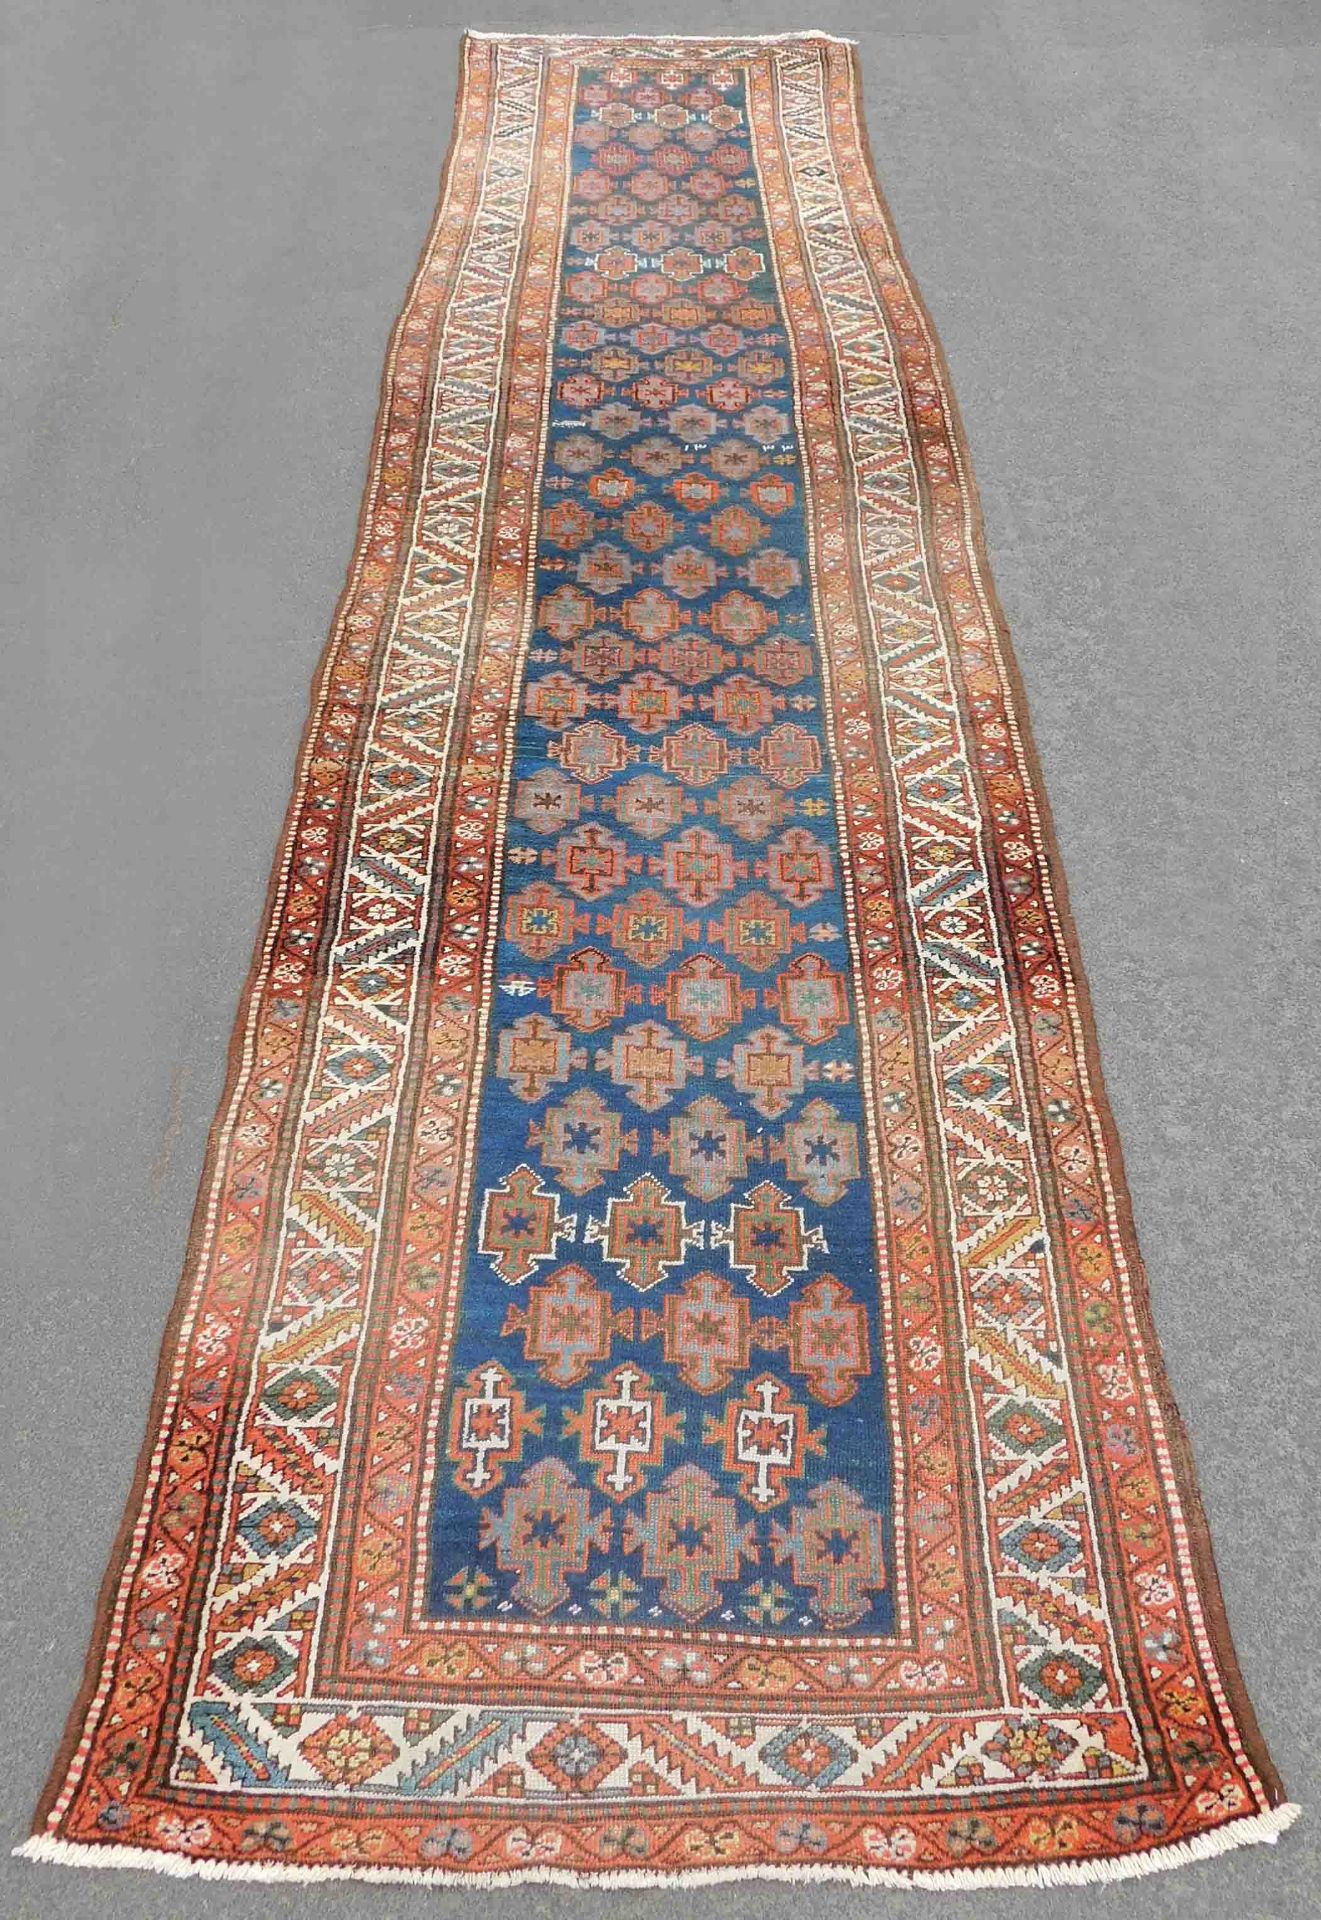 Heriz Persian rug. Runner. Iran. Antique, around 1912-1913.Knotted by hand. Wool on wool. Probably